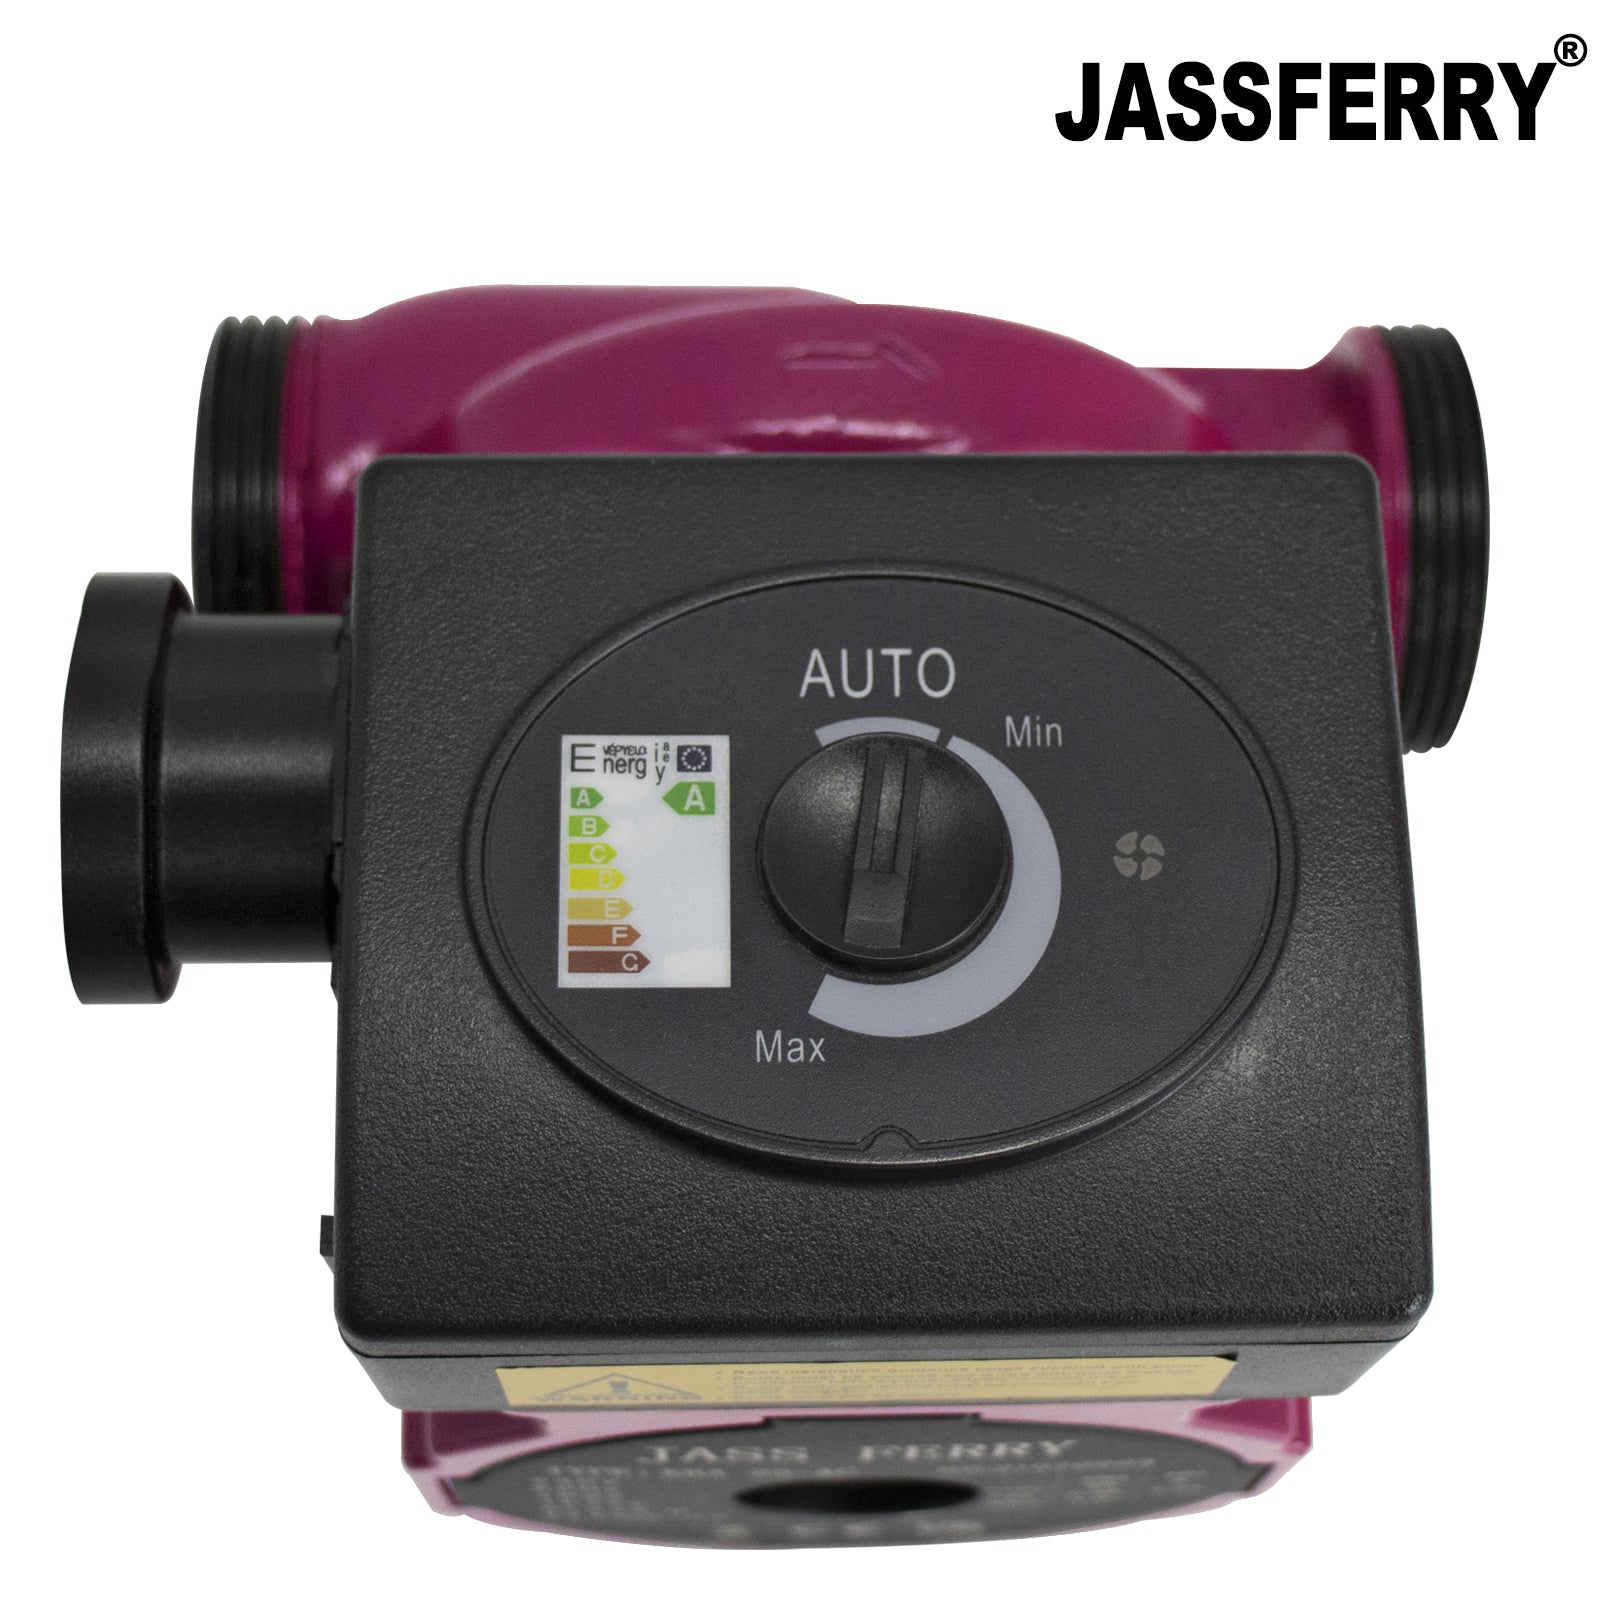 JASSFERRY A-Rated Central Heating Pump Energy Saving Hot Water Circulation Systems with Standard Plug